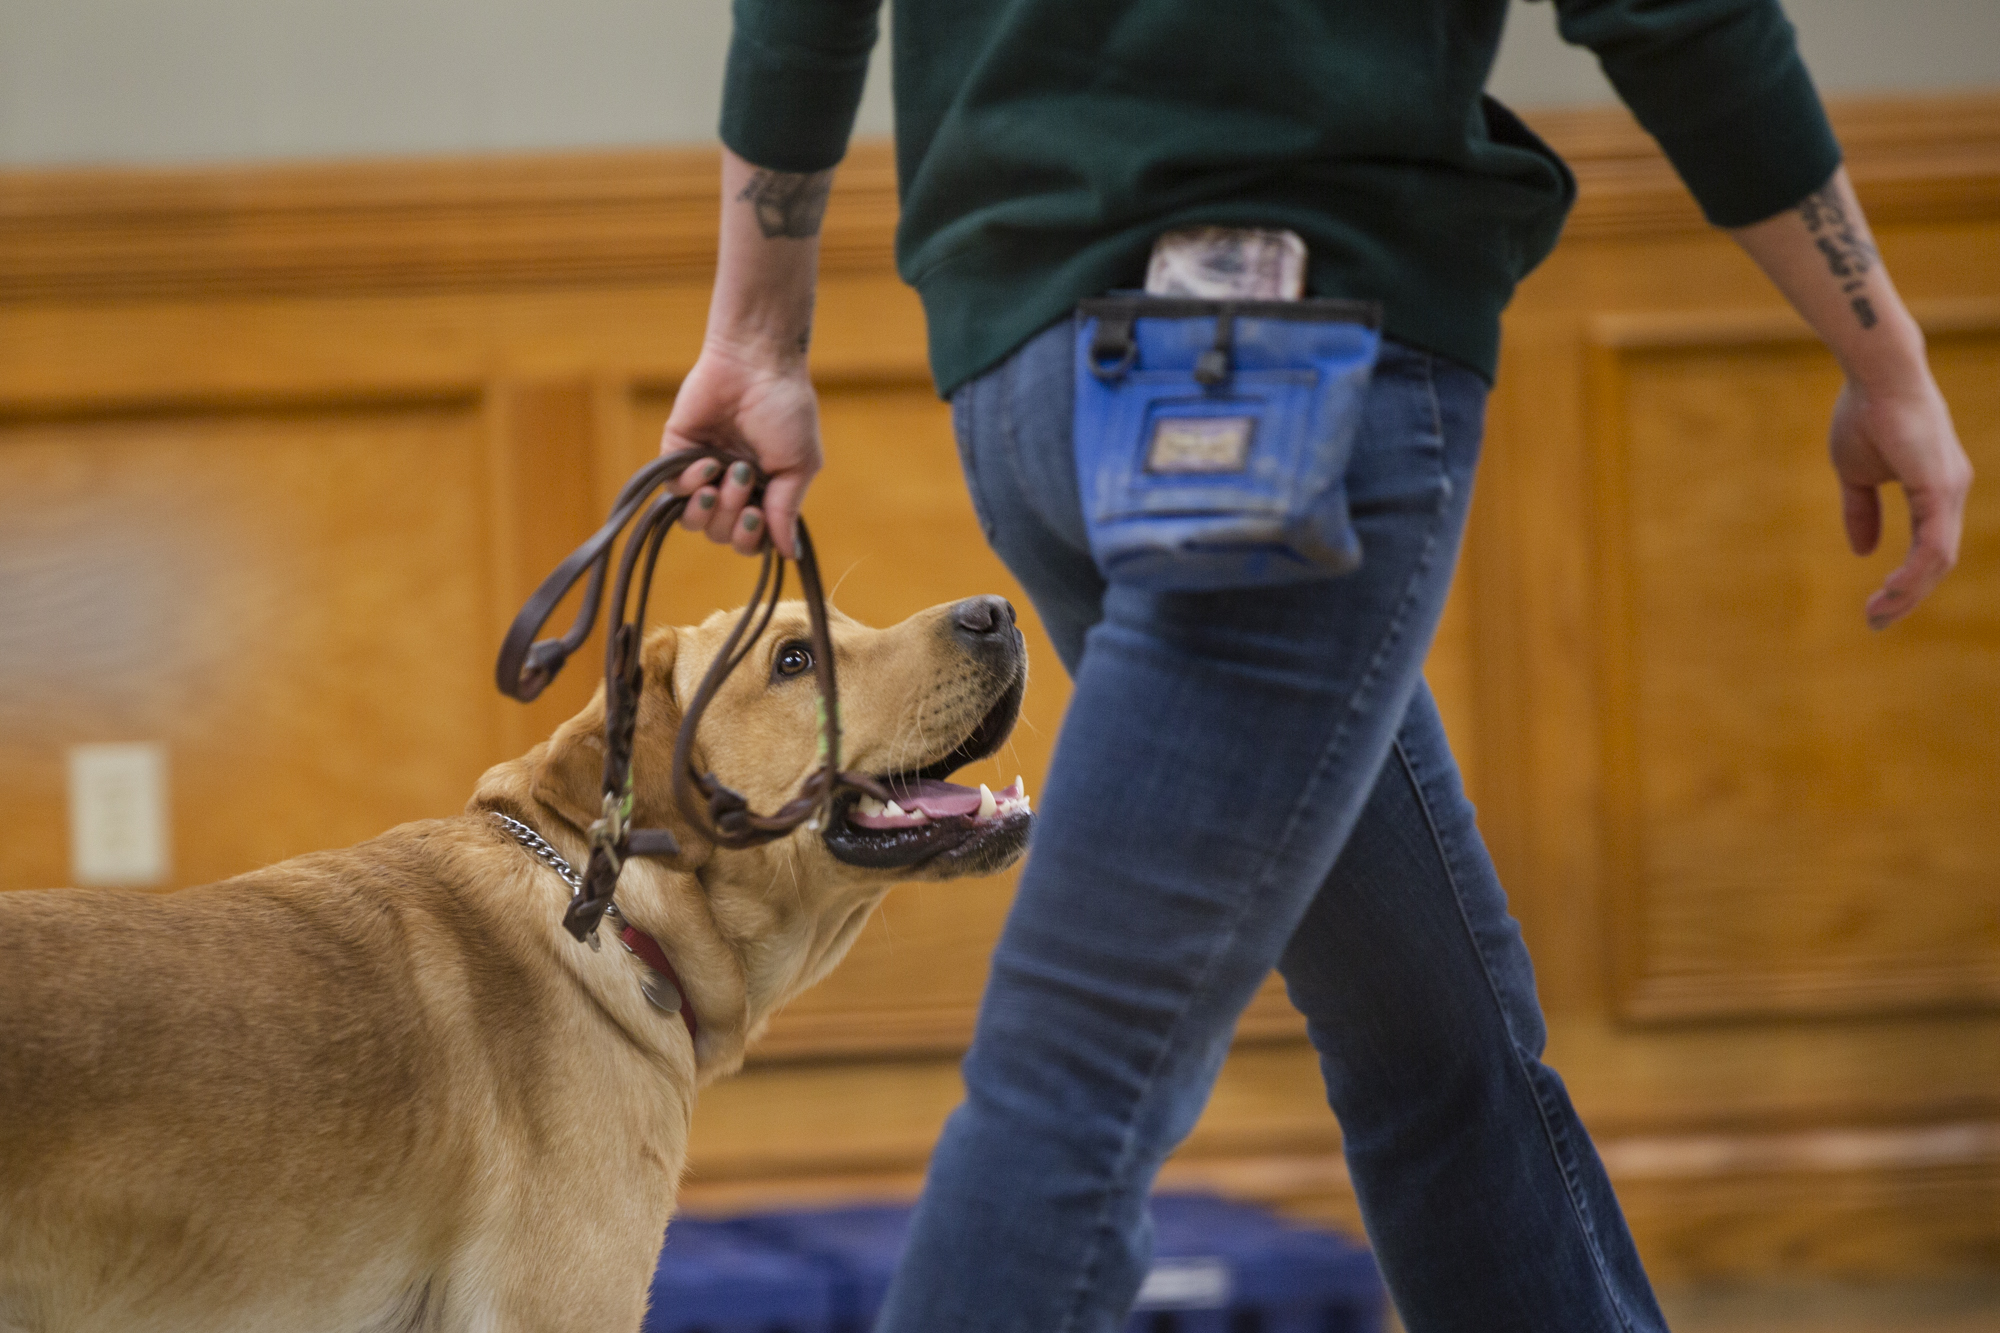  Brody checks in with a trainer during the IFT at the Guiding Eyes facility in Yorktown Heights, NY, Dec 4, 2018. The IFT, a ten-minute test of the dog's temperament, house manners, and understanding of basic commands, determines whether the dog is f